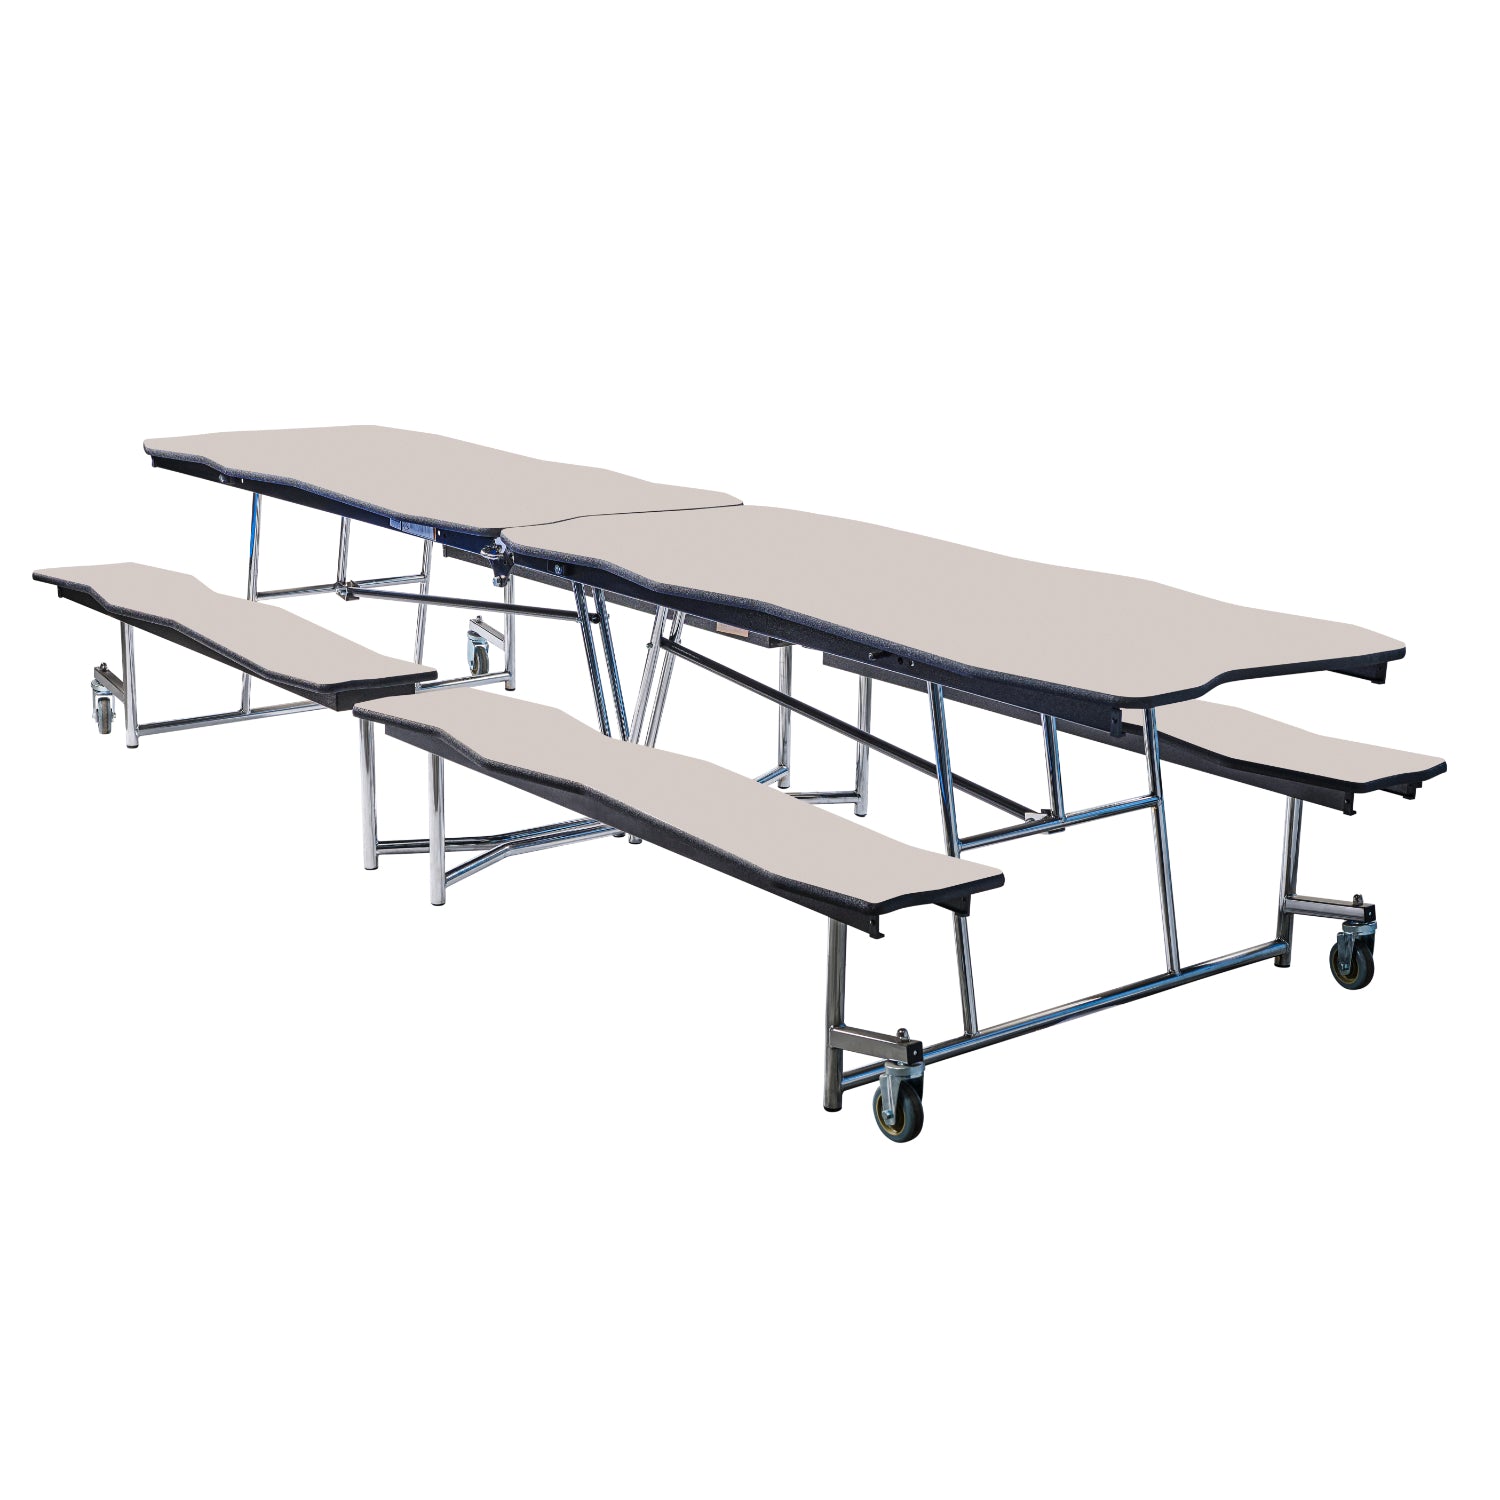 Mobile Cafeteria Table with Benches, 10' Bedrock, Plywood Core, Vinyl T-Mold Edge, Chrome Frame